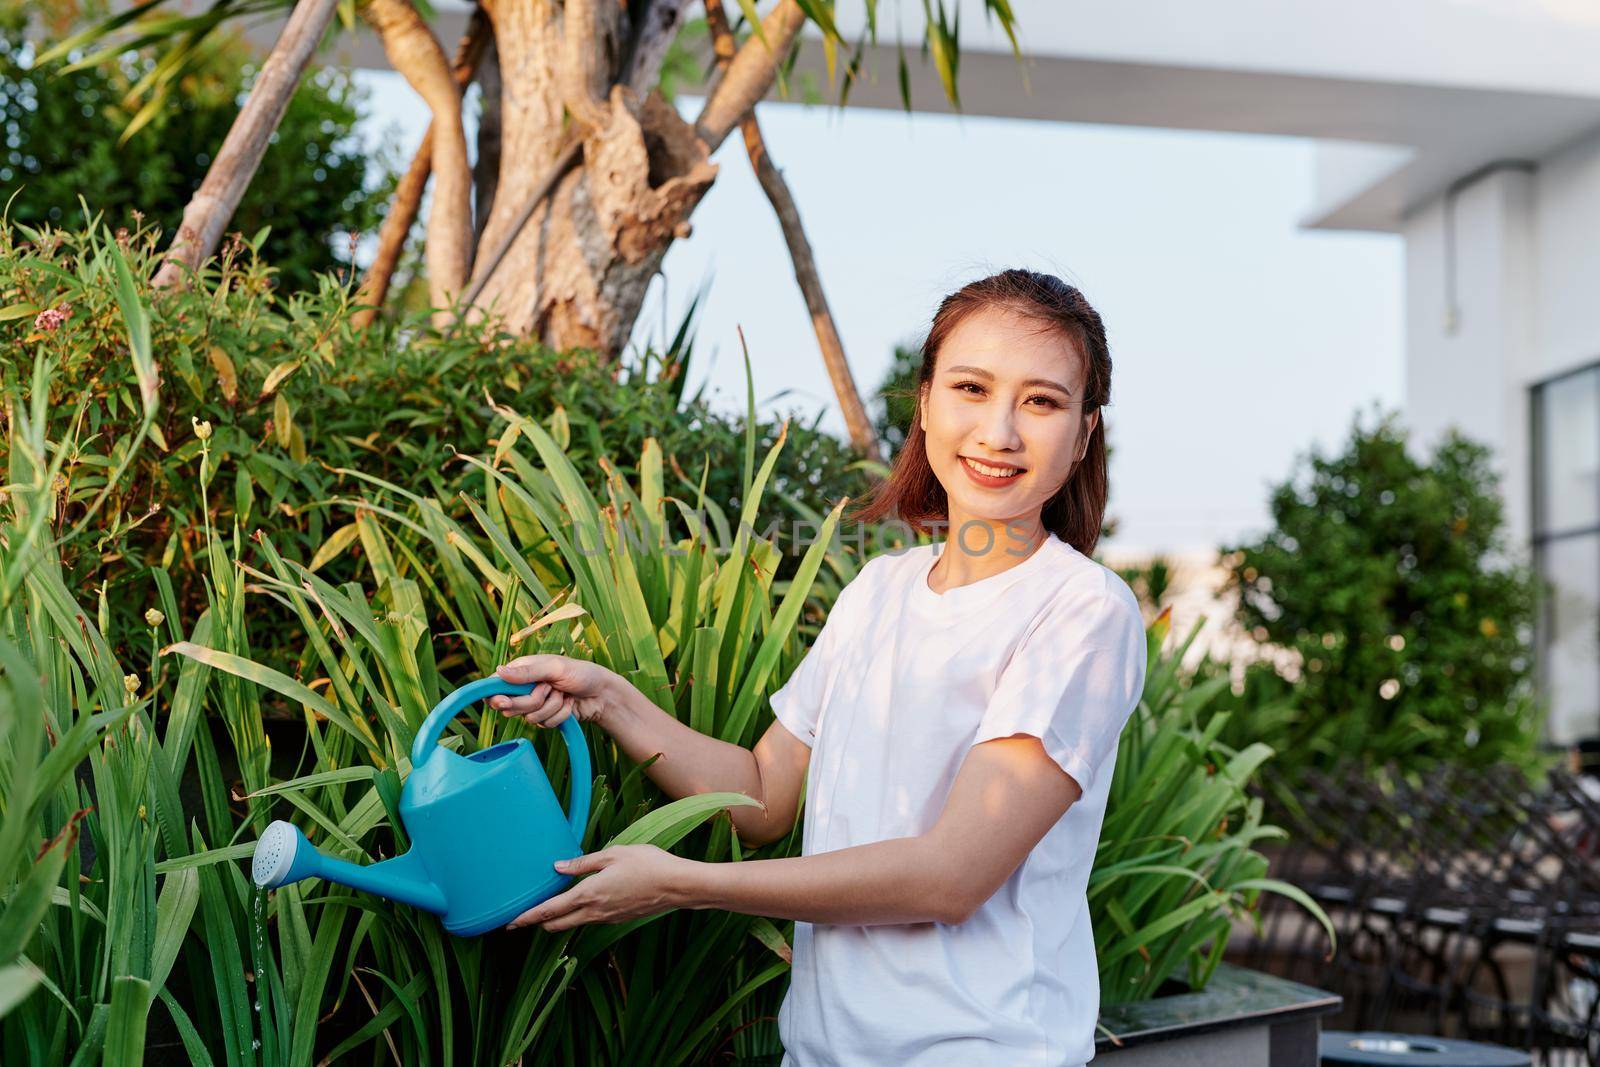 The attractive woman watering flowers, plants in her garden. by makidotvn